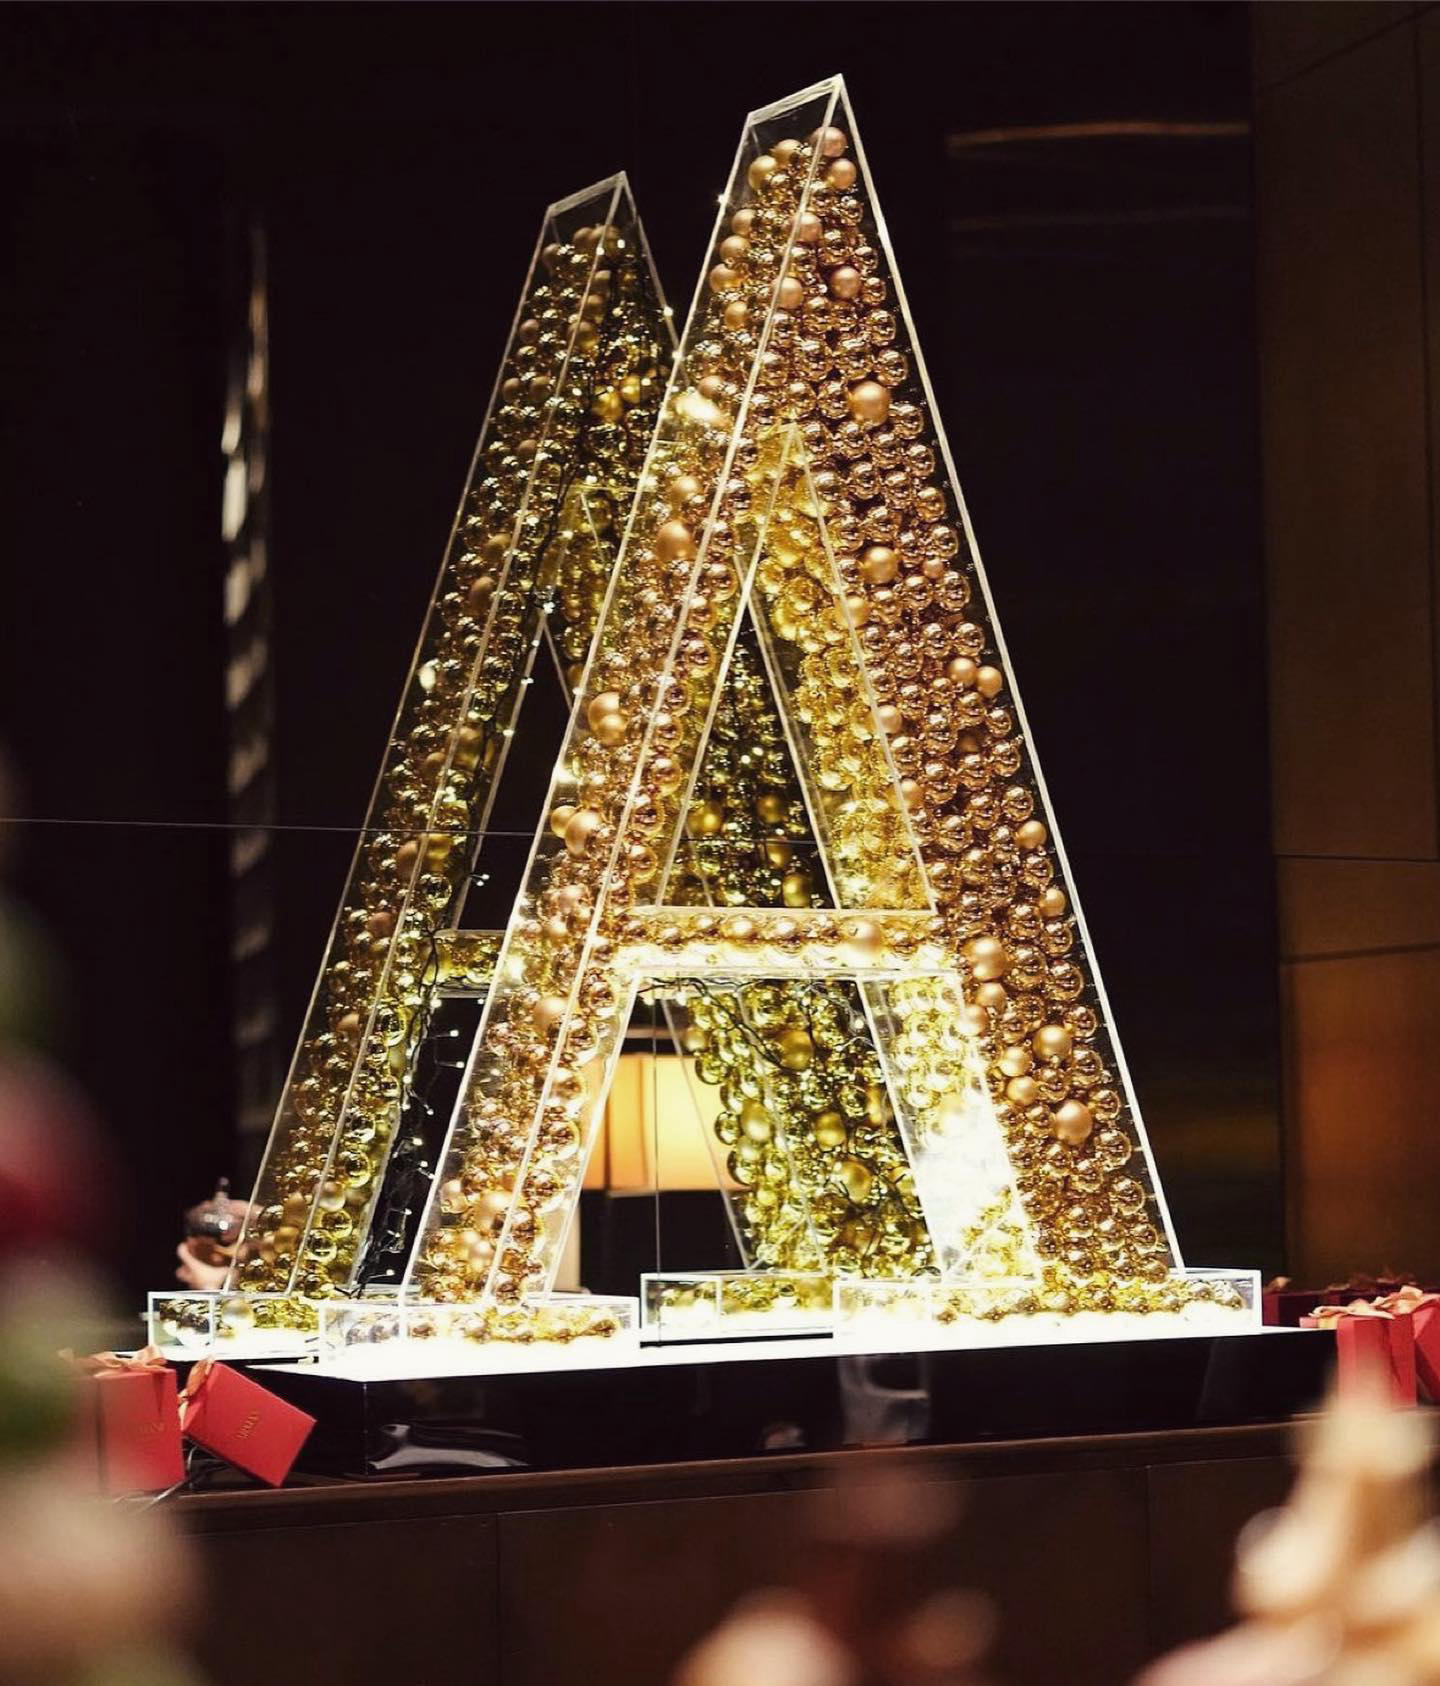 image  1 Armani Hotel Dubai - Visit our festive desk in the hotel lobby to reserve your magical Christmas or